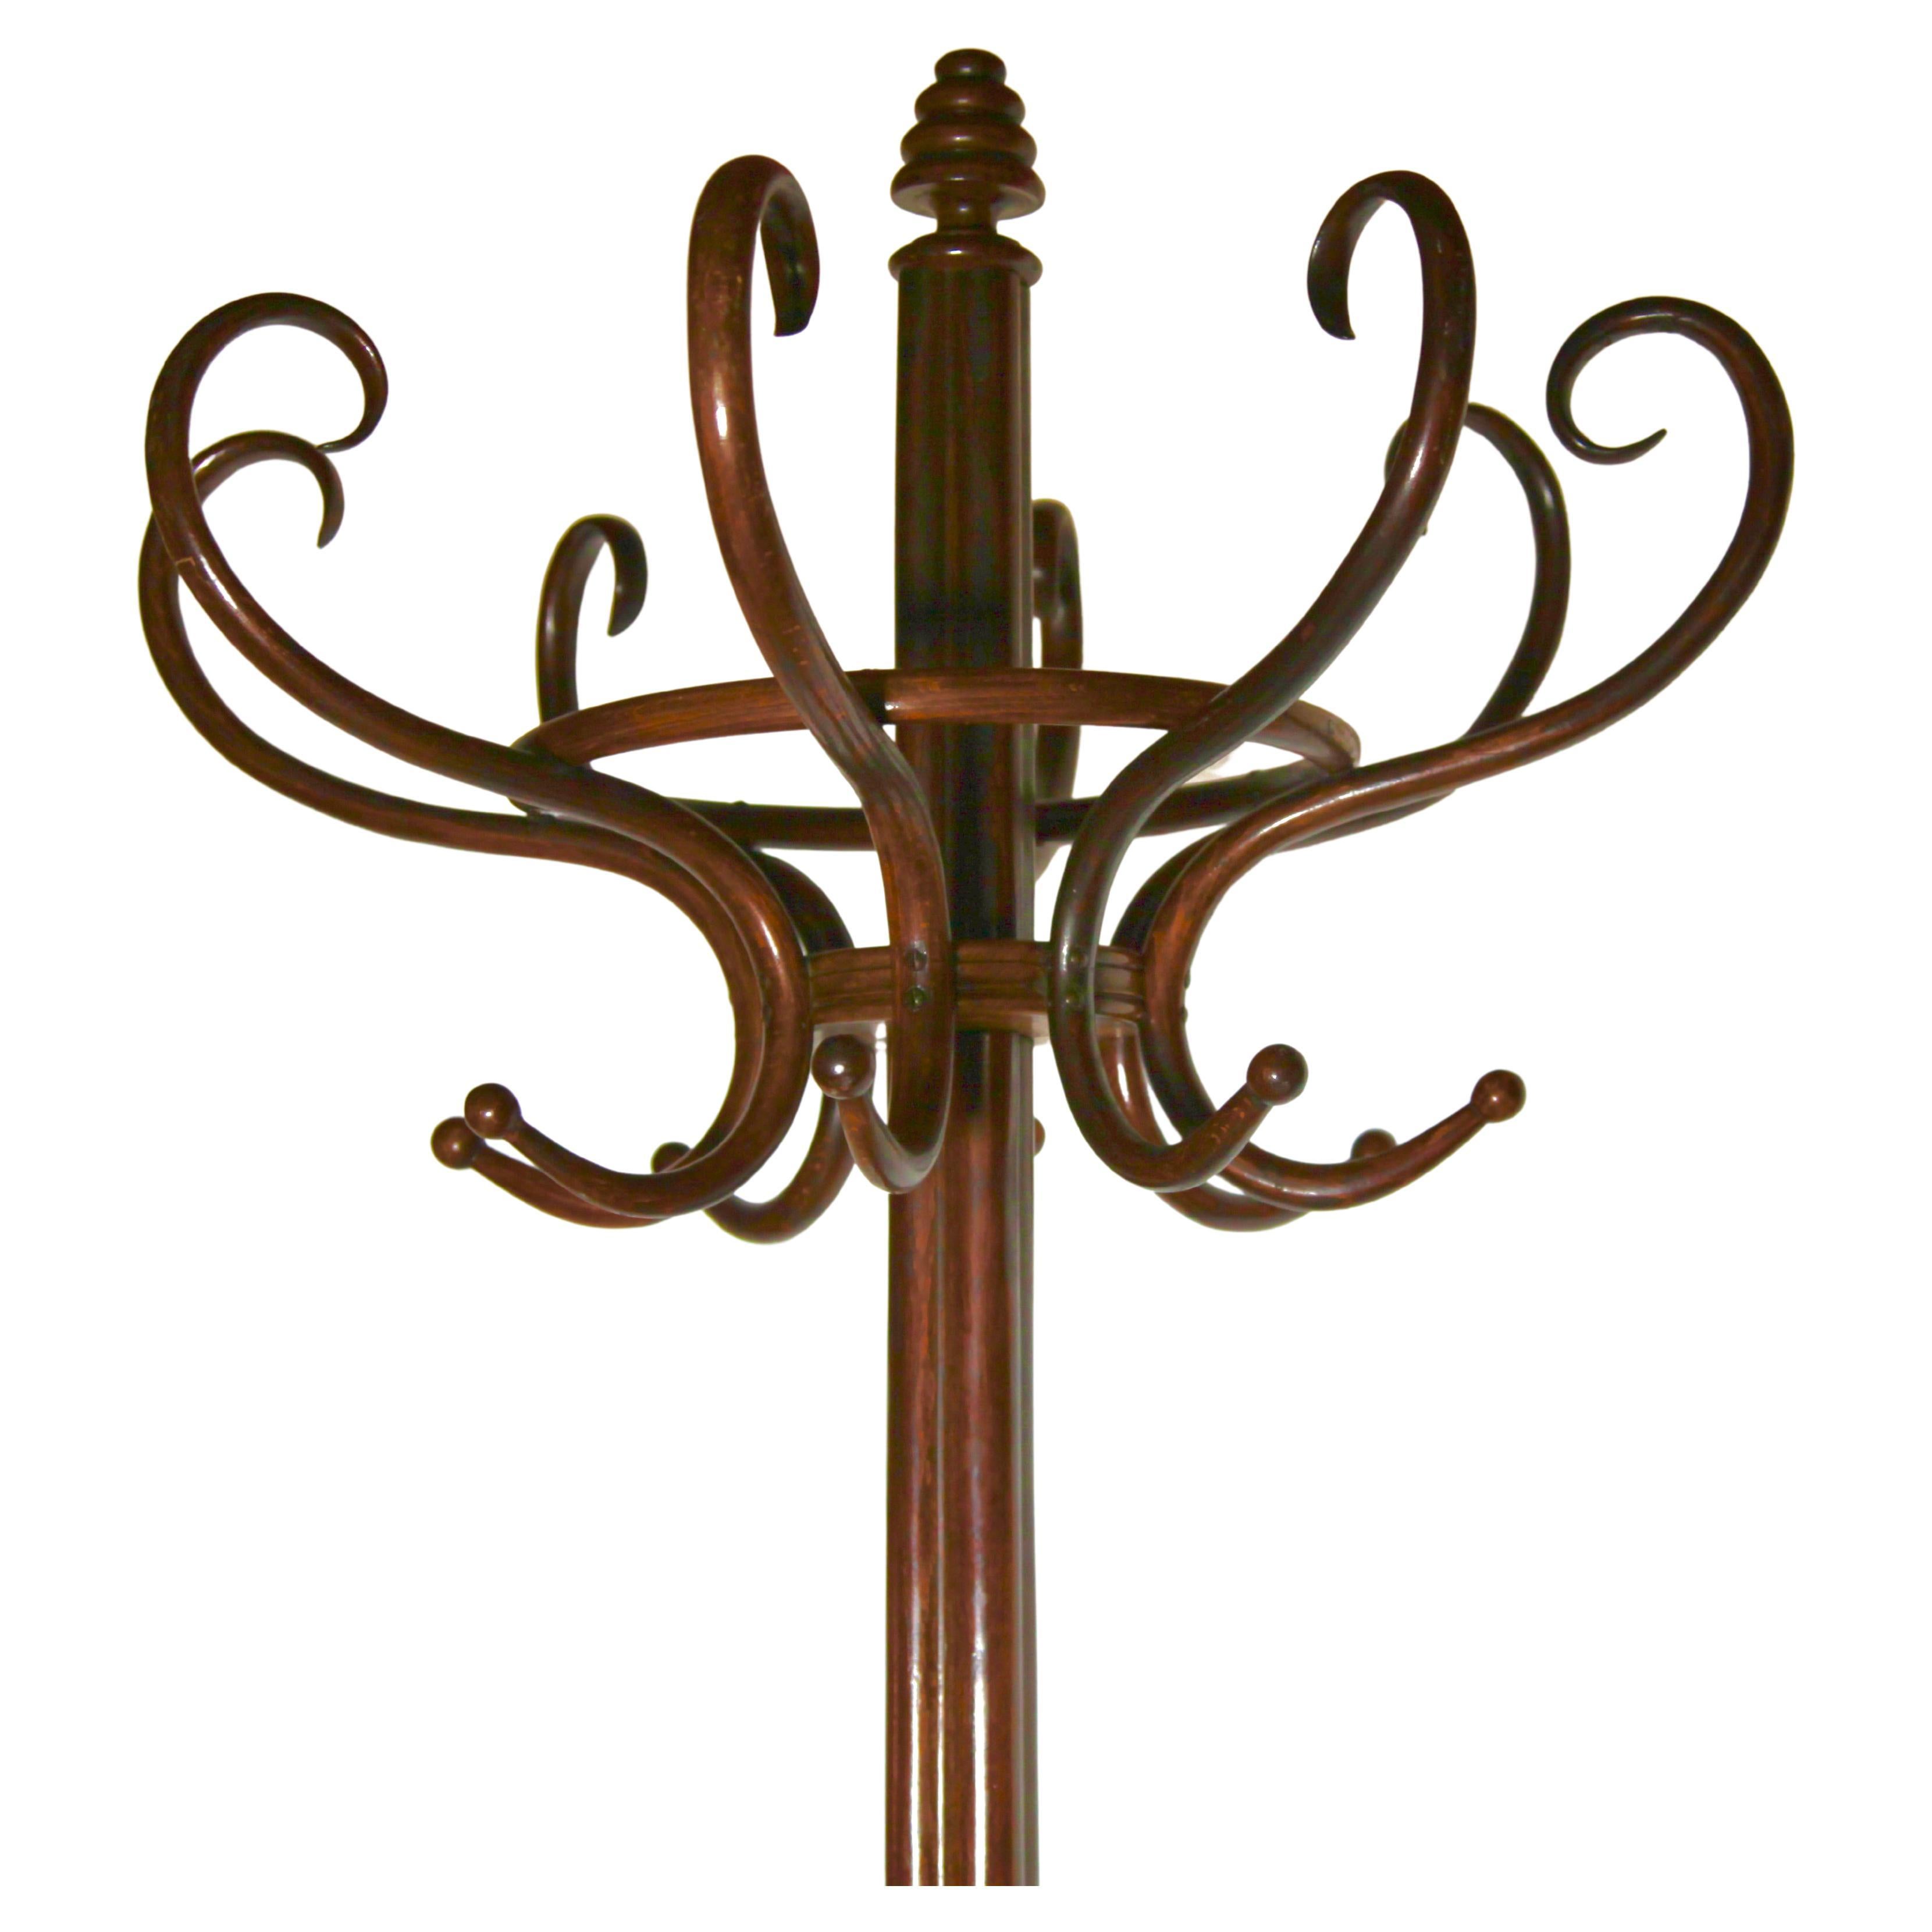 Art Nouveau bentwood coat rack attributed to Thonet, Vienna, 

Viennese coat/Umbrella hanger Thonet was included in the production program of the company Gebrüder Thonet around the Year 1879. Original 'Thonet'
Very rare and interesting finish,